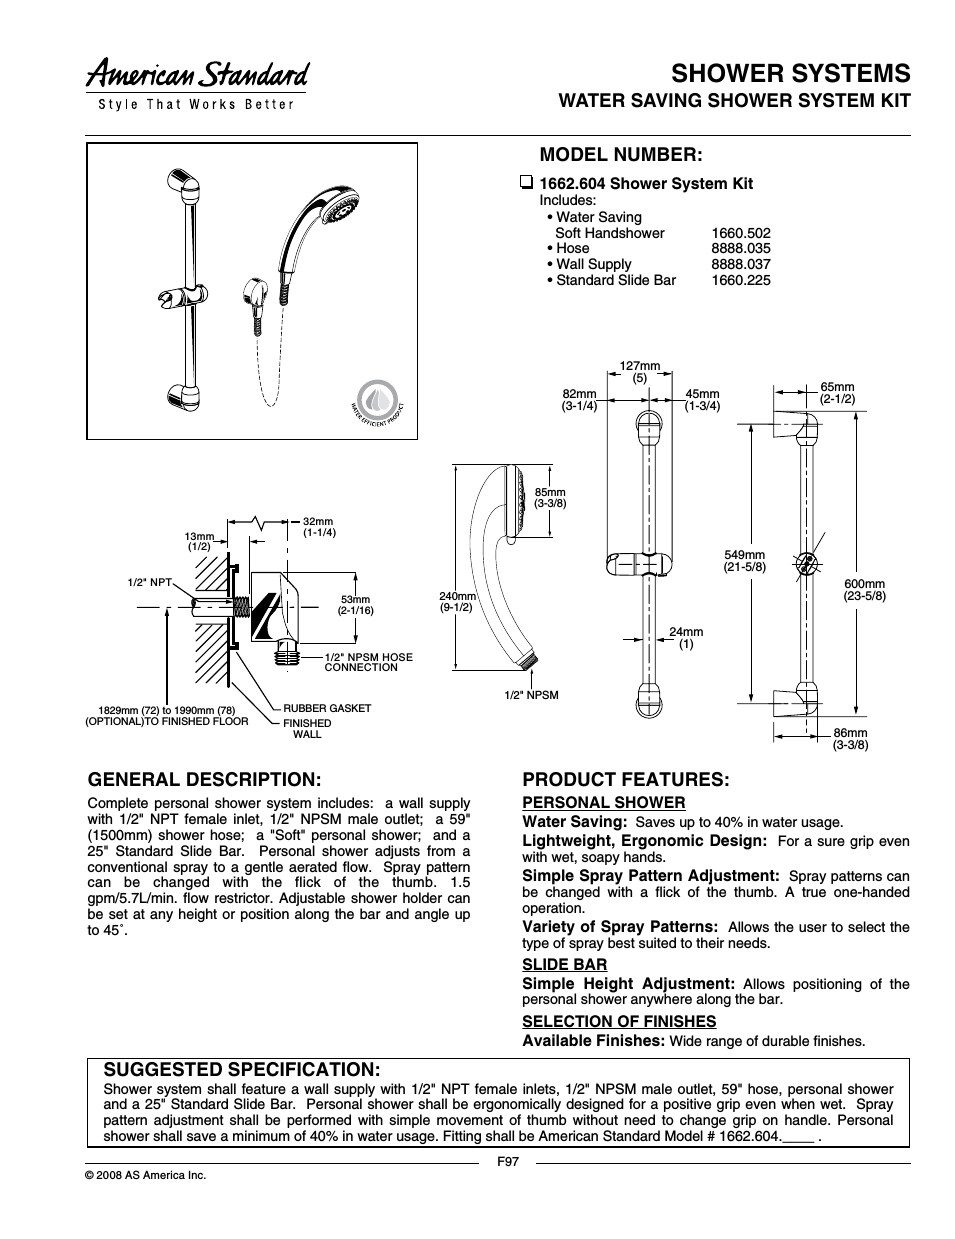 Shower Systems 1660.502